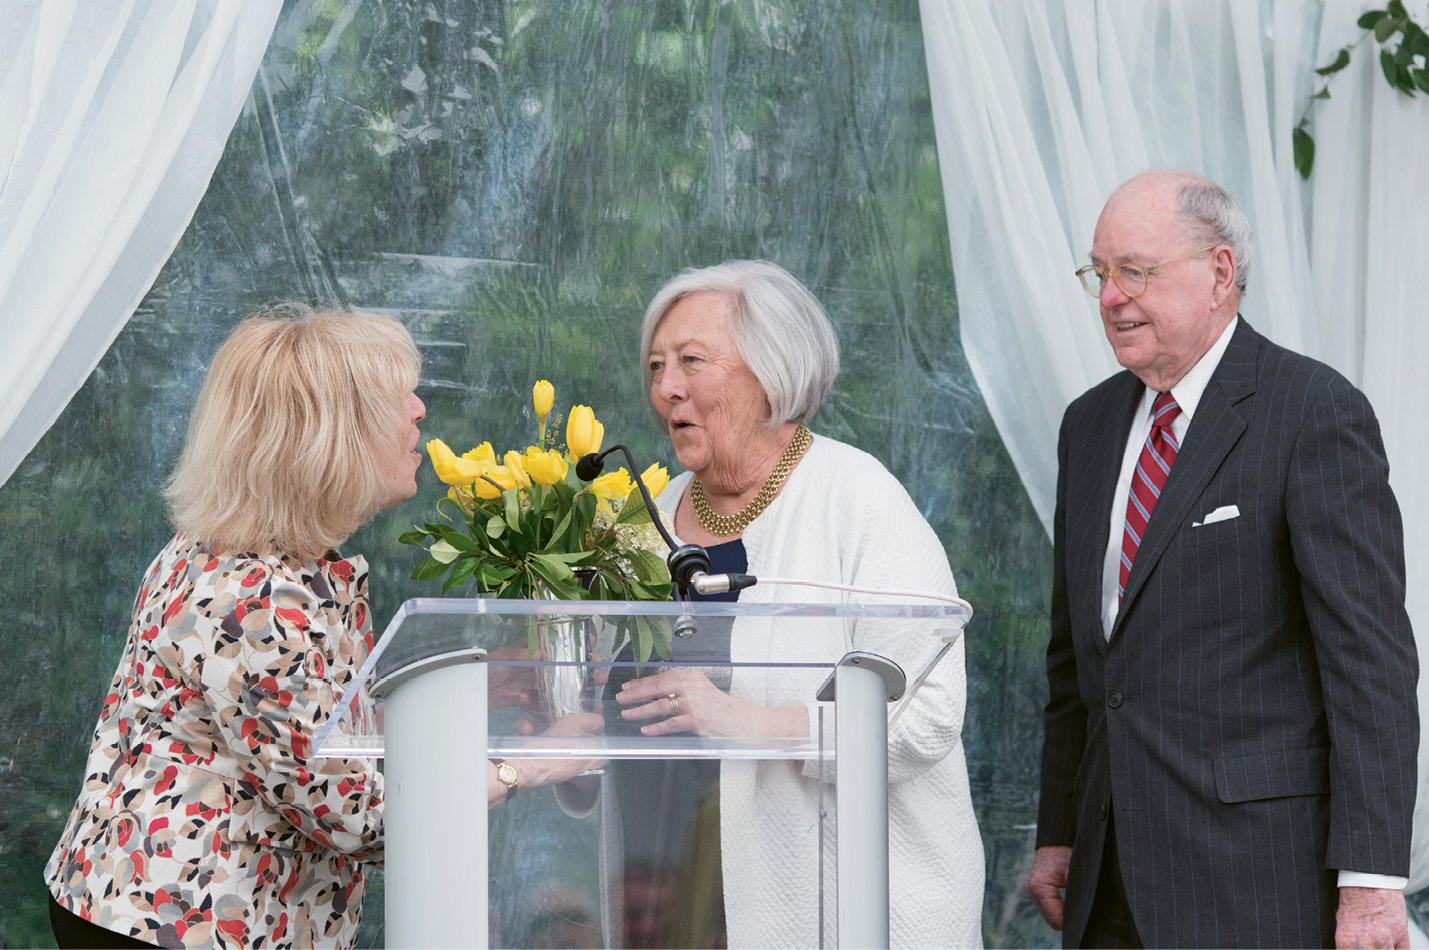 Last April, renowned flutist and Spoleto Festival Chamber Music alum Paula Robison presented the Mary Ramsay Civic Award to Peter and Patti.